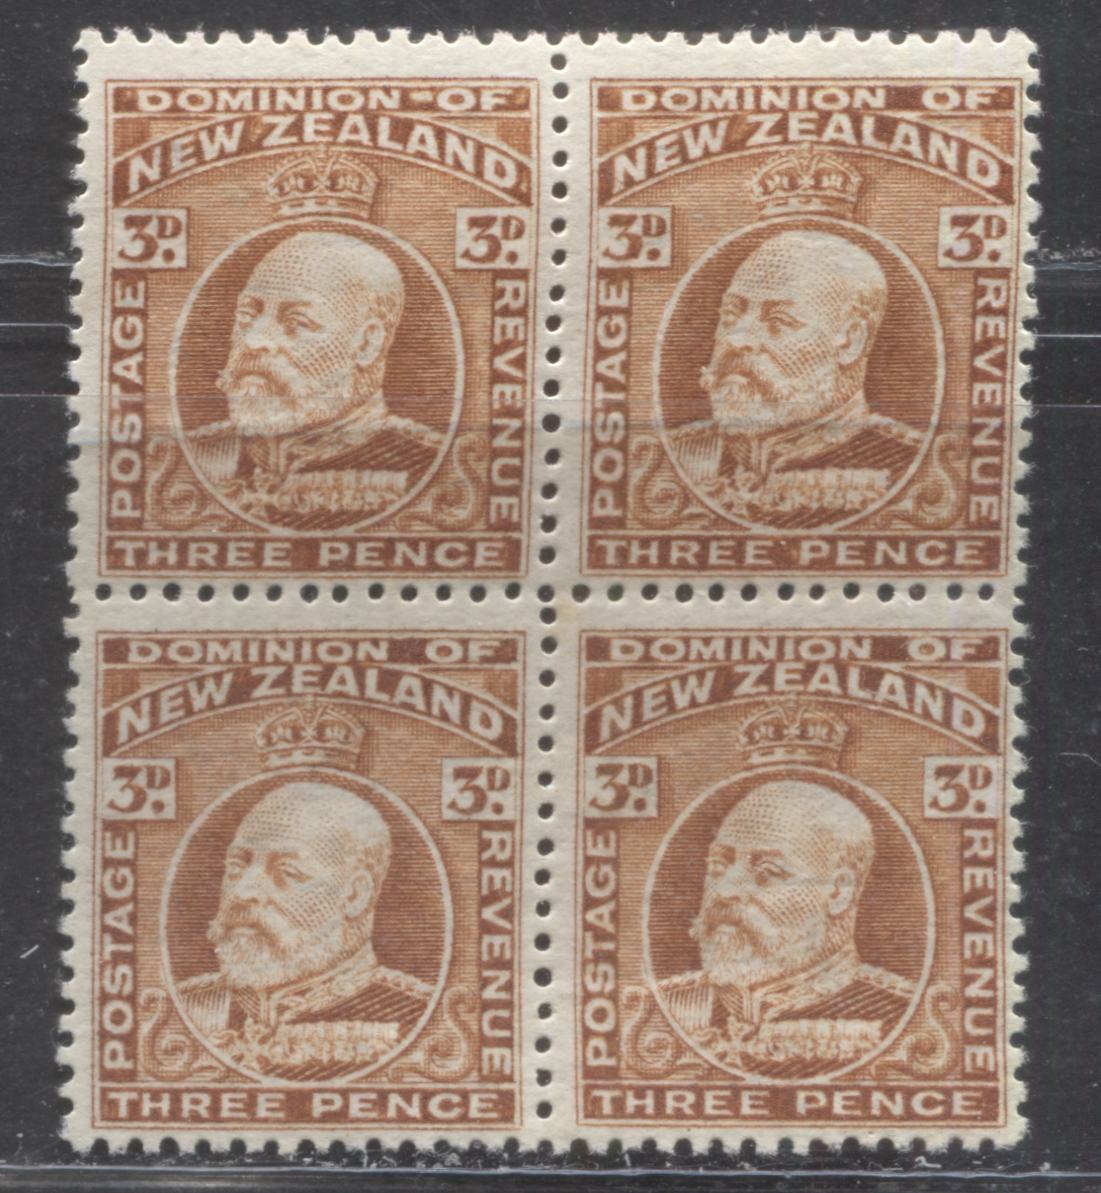 Lot 96 New Zealand SC#133 3d Brown, Perf 14 x 14.5 1909-1916 King Edward VII Definitive Issue, A F/VFNH Block of 4, 2022 Scott Classic Cat. $270 USD, Click on Listing to See ALL Pictures